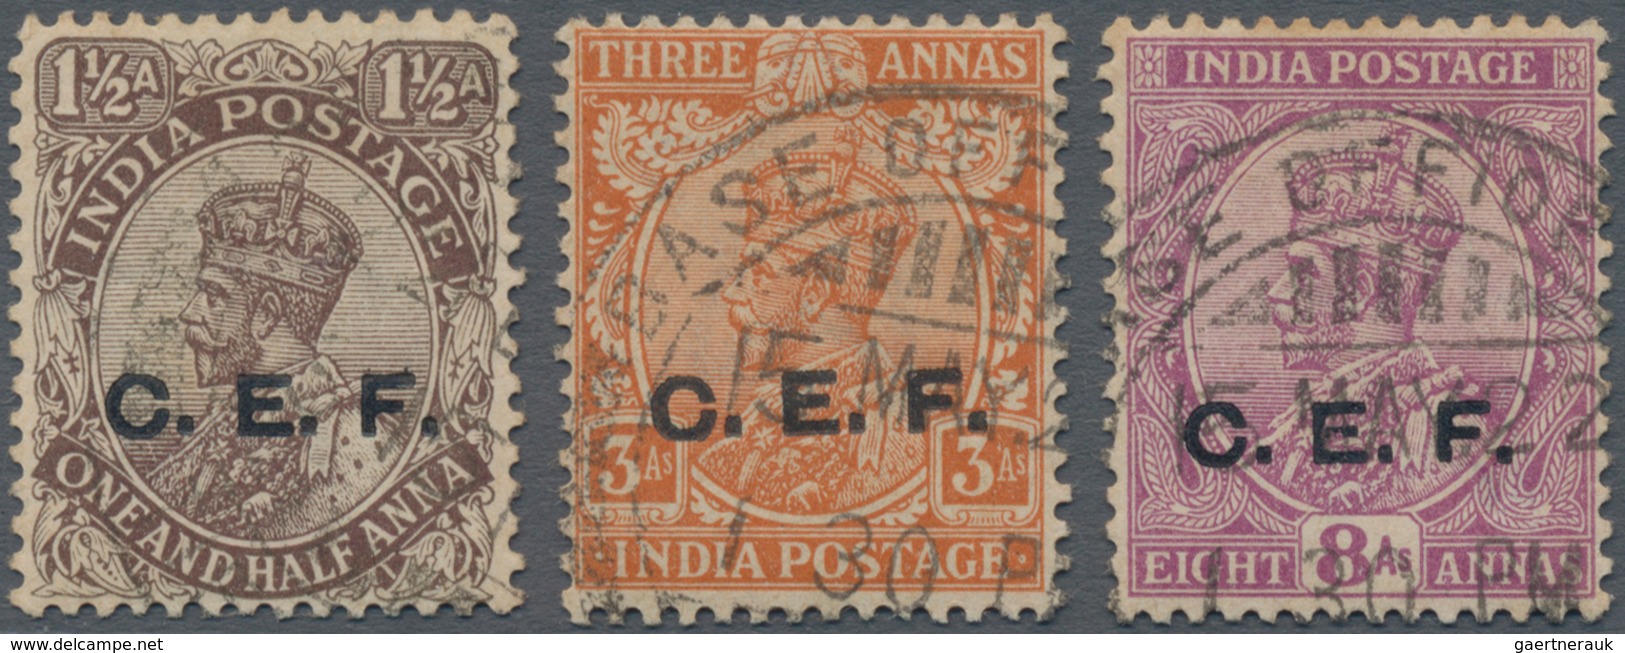 Indien - Feldpost: 1914-22 Chinese Exped. Force C.E.F.: Three KGV. Stamps Denom. 1a3p., 3a. And 8a. - Militärpostmarken